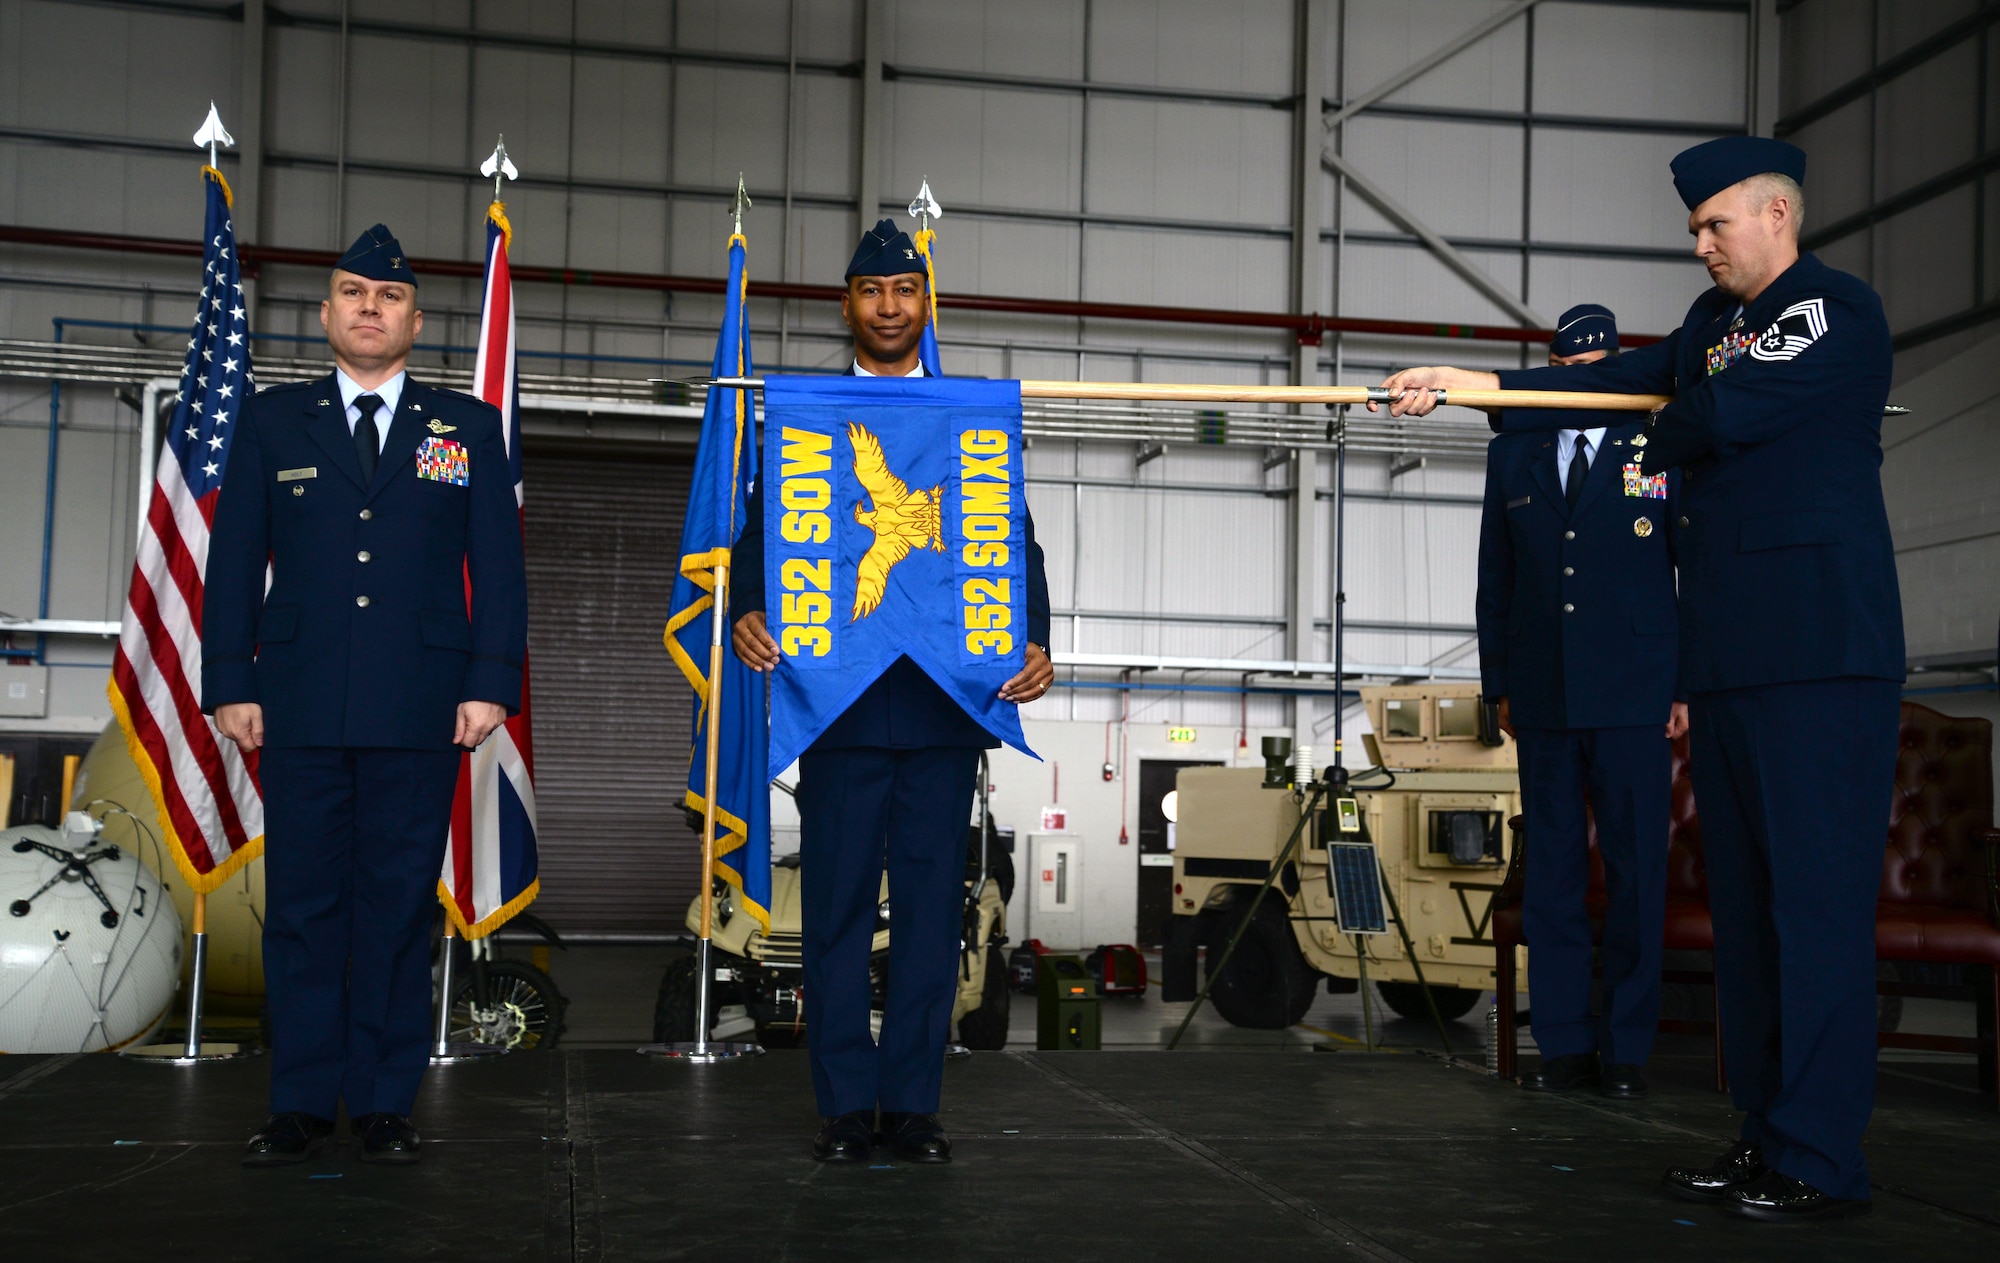 U.S. Air Force Col. Eric Faison, 352nd Special Operations Maintenance Group commander, poses after unravelling the 352nd SOMXG flag during the 352nd Special Operations Wing activation ceremony March 23, 2015, on RAF Mildenhall, England. (U.S. Air Force photo by Senior Airman Christine Griffiths)